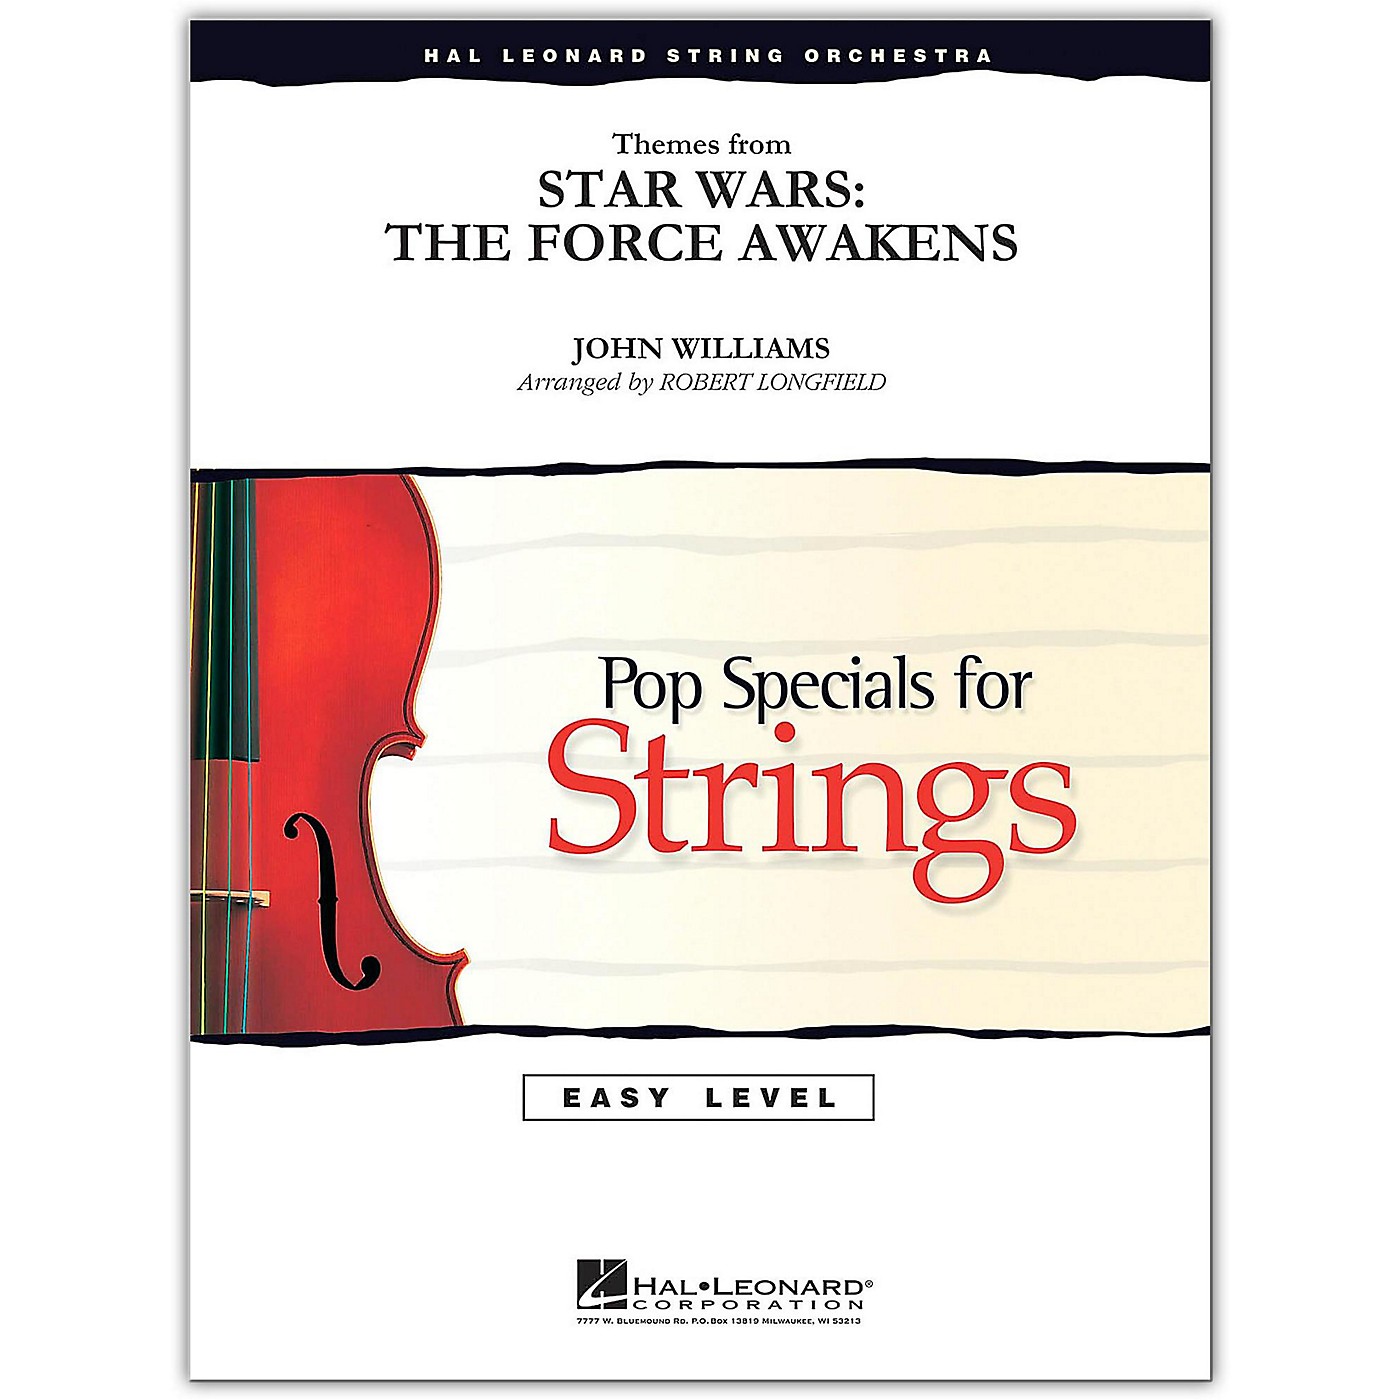 Hal Leonard Themes From Star Wars: The Force Awakens Easy Pop Specials For Strings by Level 2-3 by Robert Longfield thumbnail